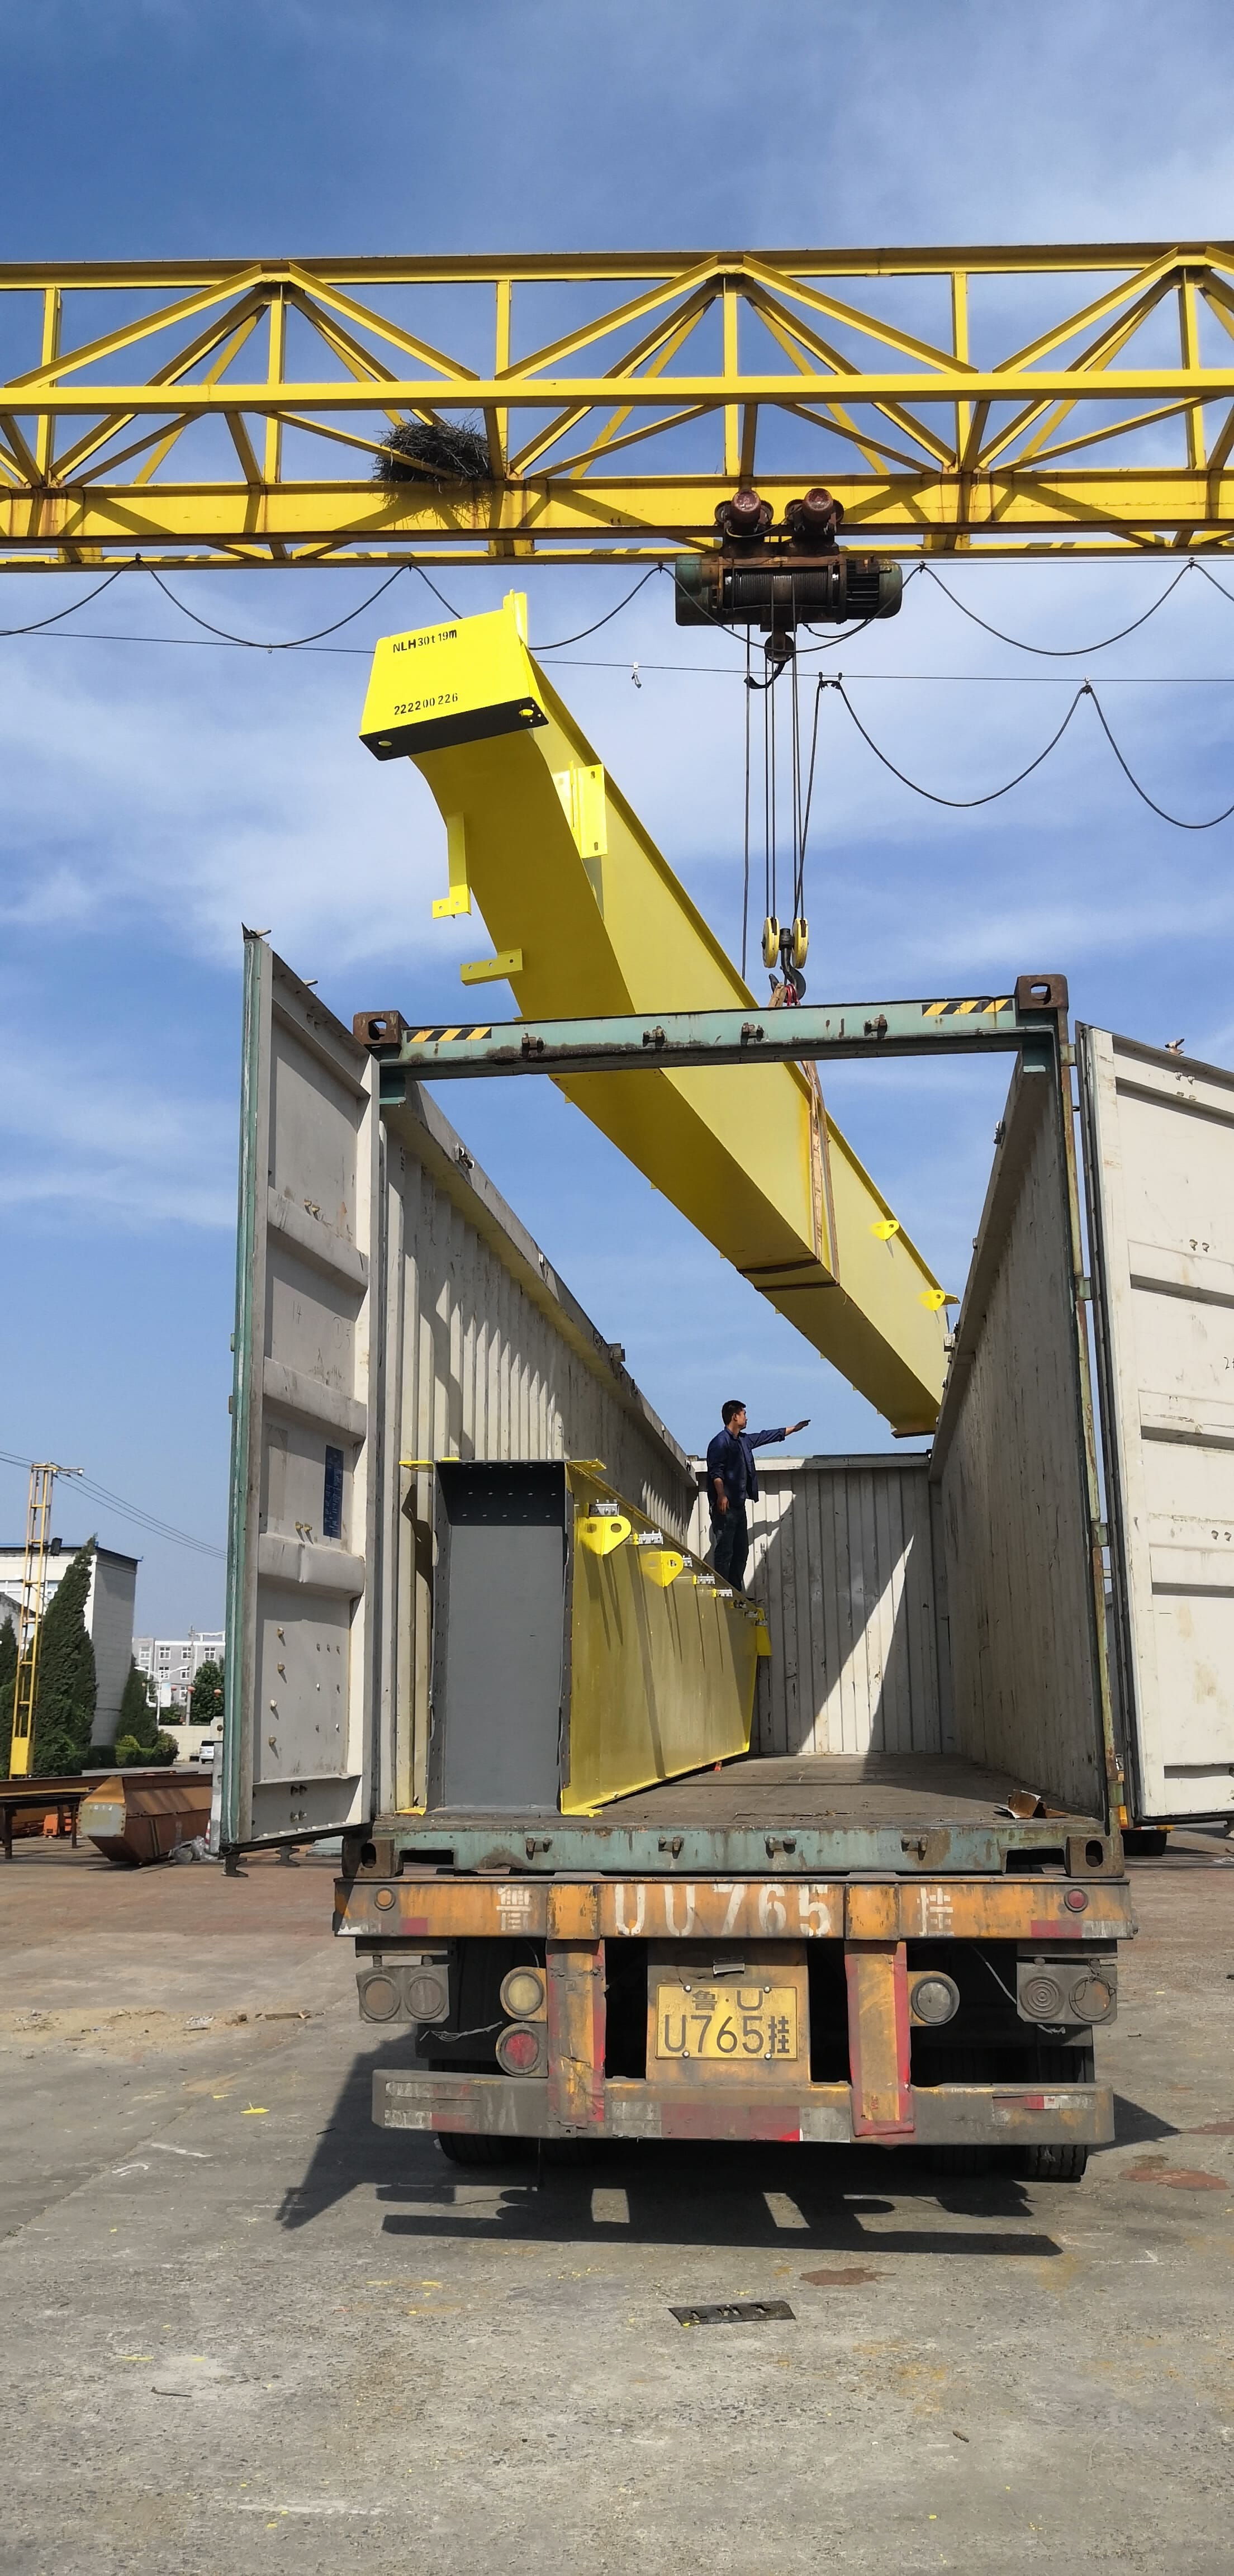 11 Sets Of NLH Overhead Crane Exported to Qatar3